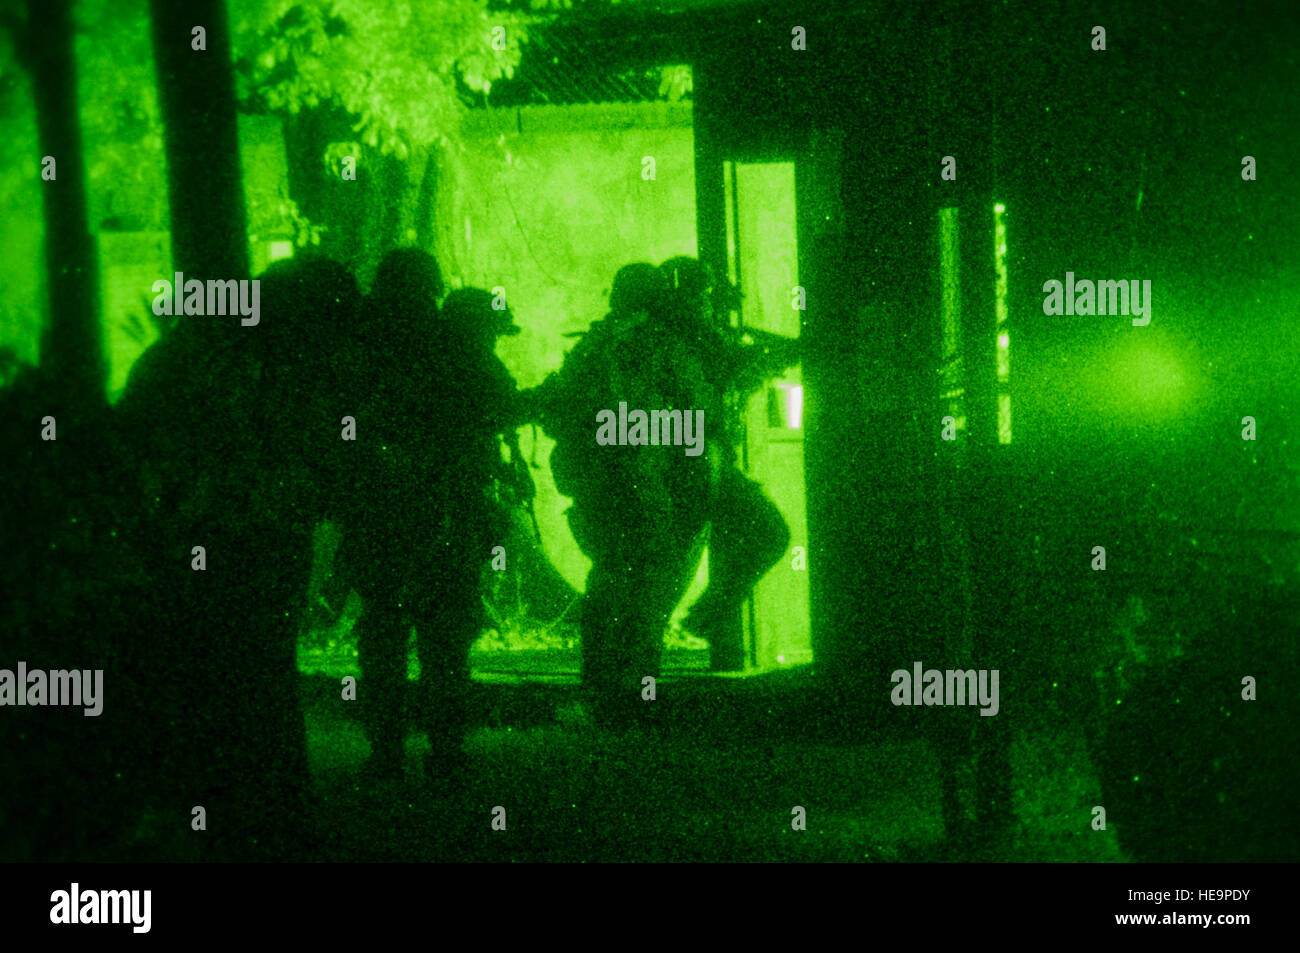 U.S. Army special forces Soldiers storm a house during Operation Serpent Catfish as part of Emerald Warrior 2013, John C. Stennis Space Center, Miss., May 1. During the operation, the Soldiers infiltrated a simulated hostile camp, eliminated the enemy threat and collected evidence as part of sensitive site exploitation. The primary purpose of Emerald Warrior is to exercise special operations components in urban and irregular warfare settings to support combatant commanders. Emerald Warrior leverages lessons from Operation Iraqi Freedom,Operation Enduring Freedom and other historical lessons to Stock Photo